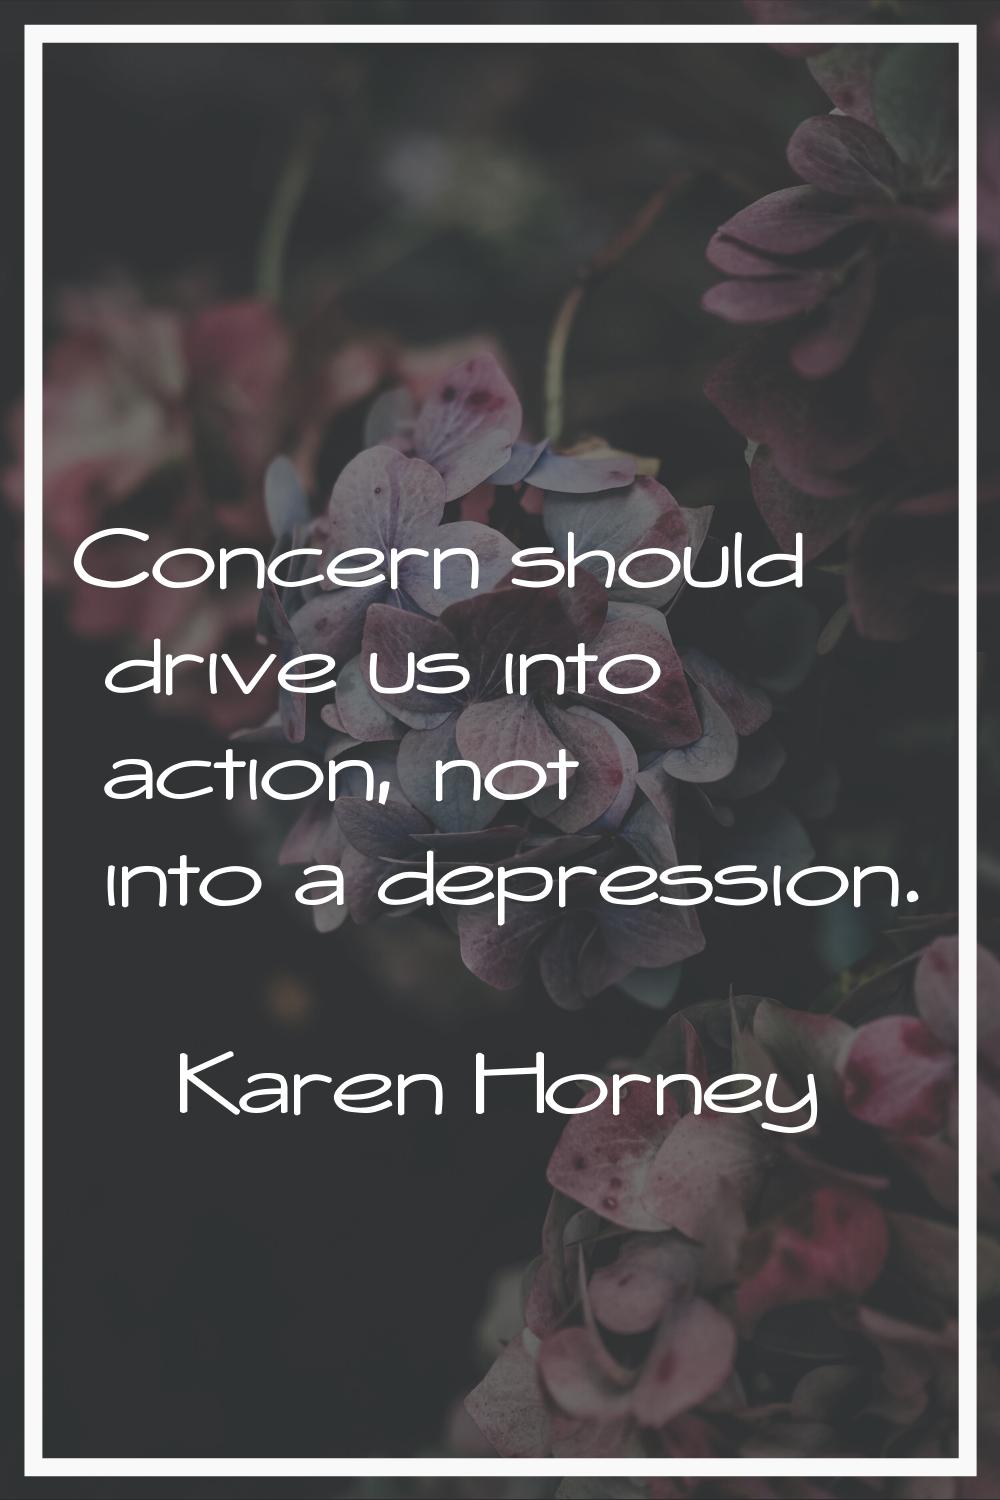 Concern should drive us into action, not into a depression.